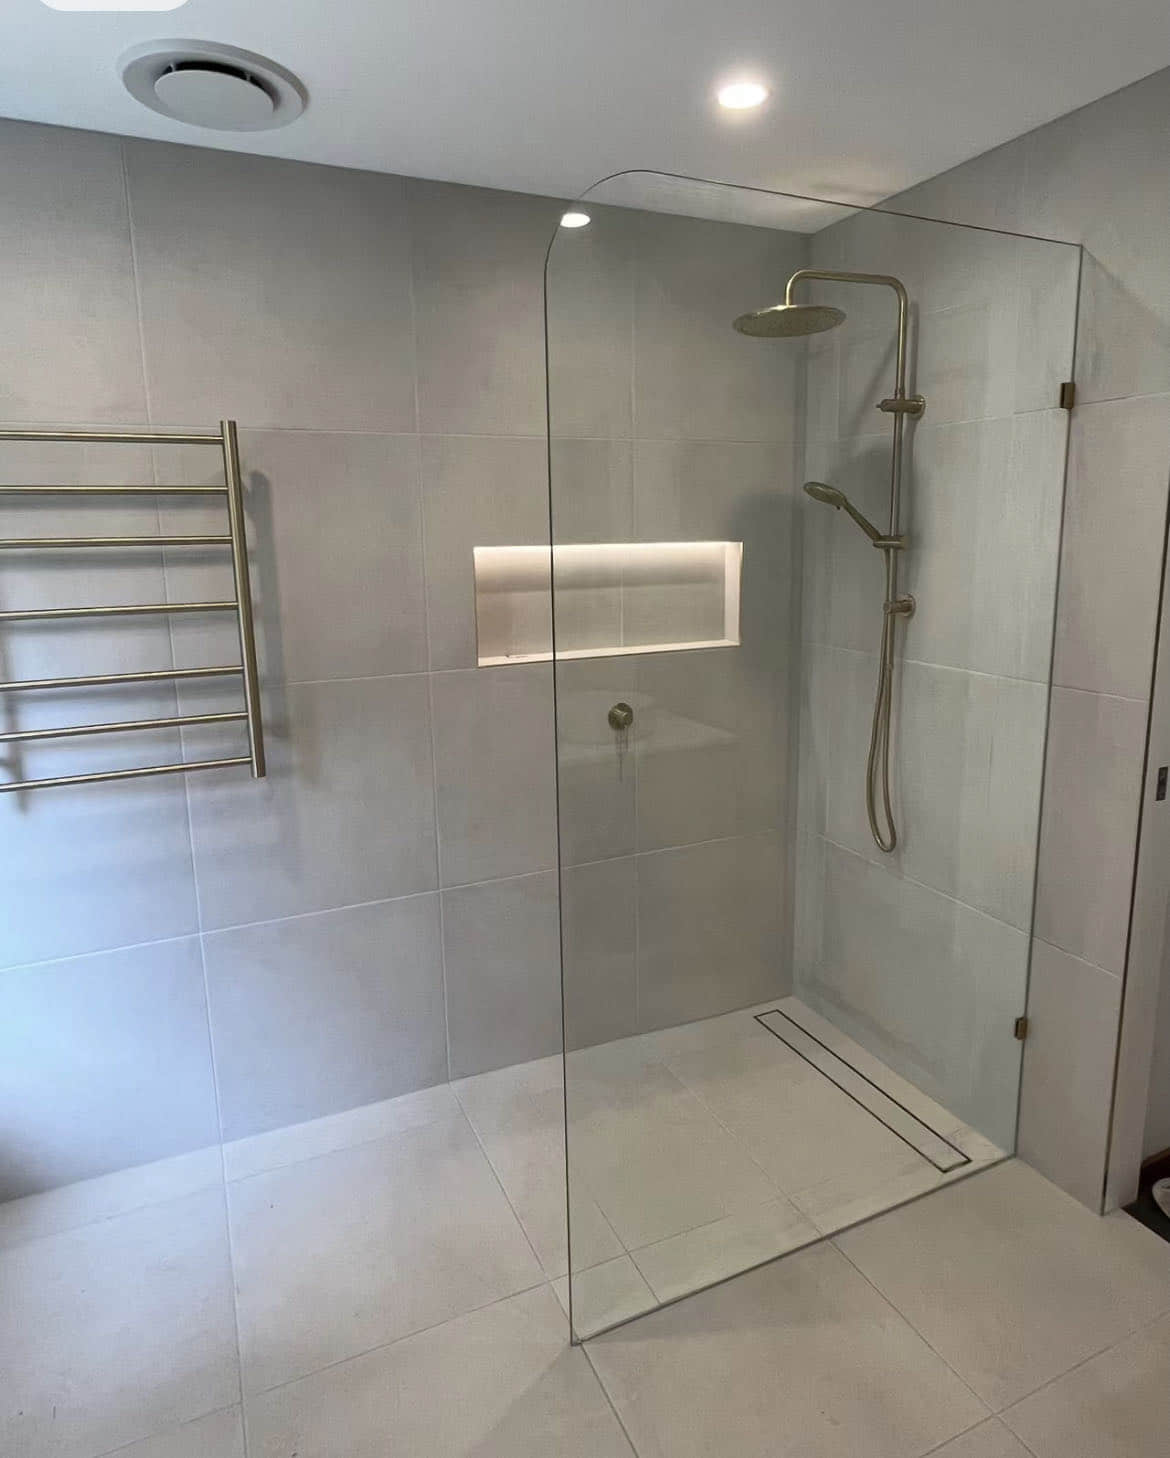 No place else than Infinity plus bathrooms that offers the full range of Milano shower screen